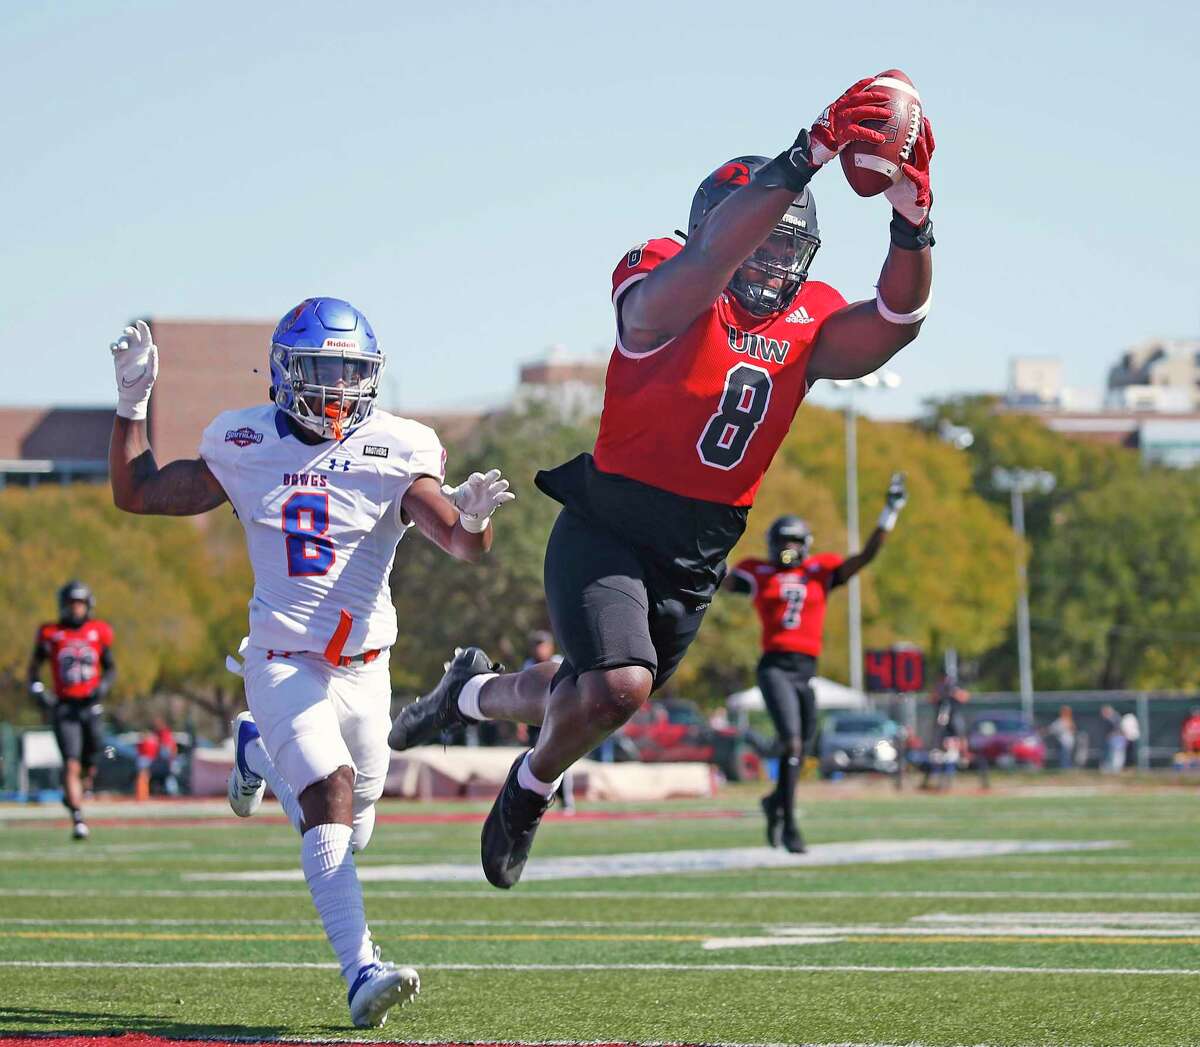 Incarnate Word’s Kelechi Anyalebechi dives for the end zone to score on a pick-six in Saturday’s 73-20 win over HCU.